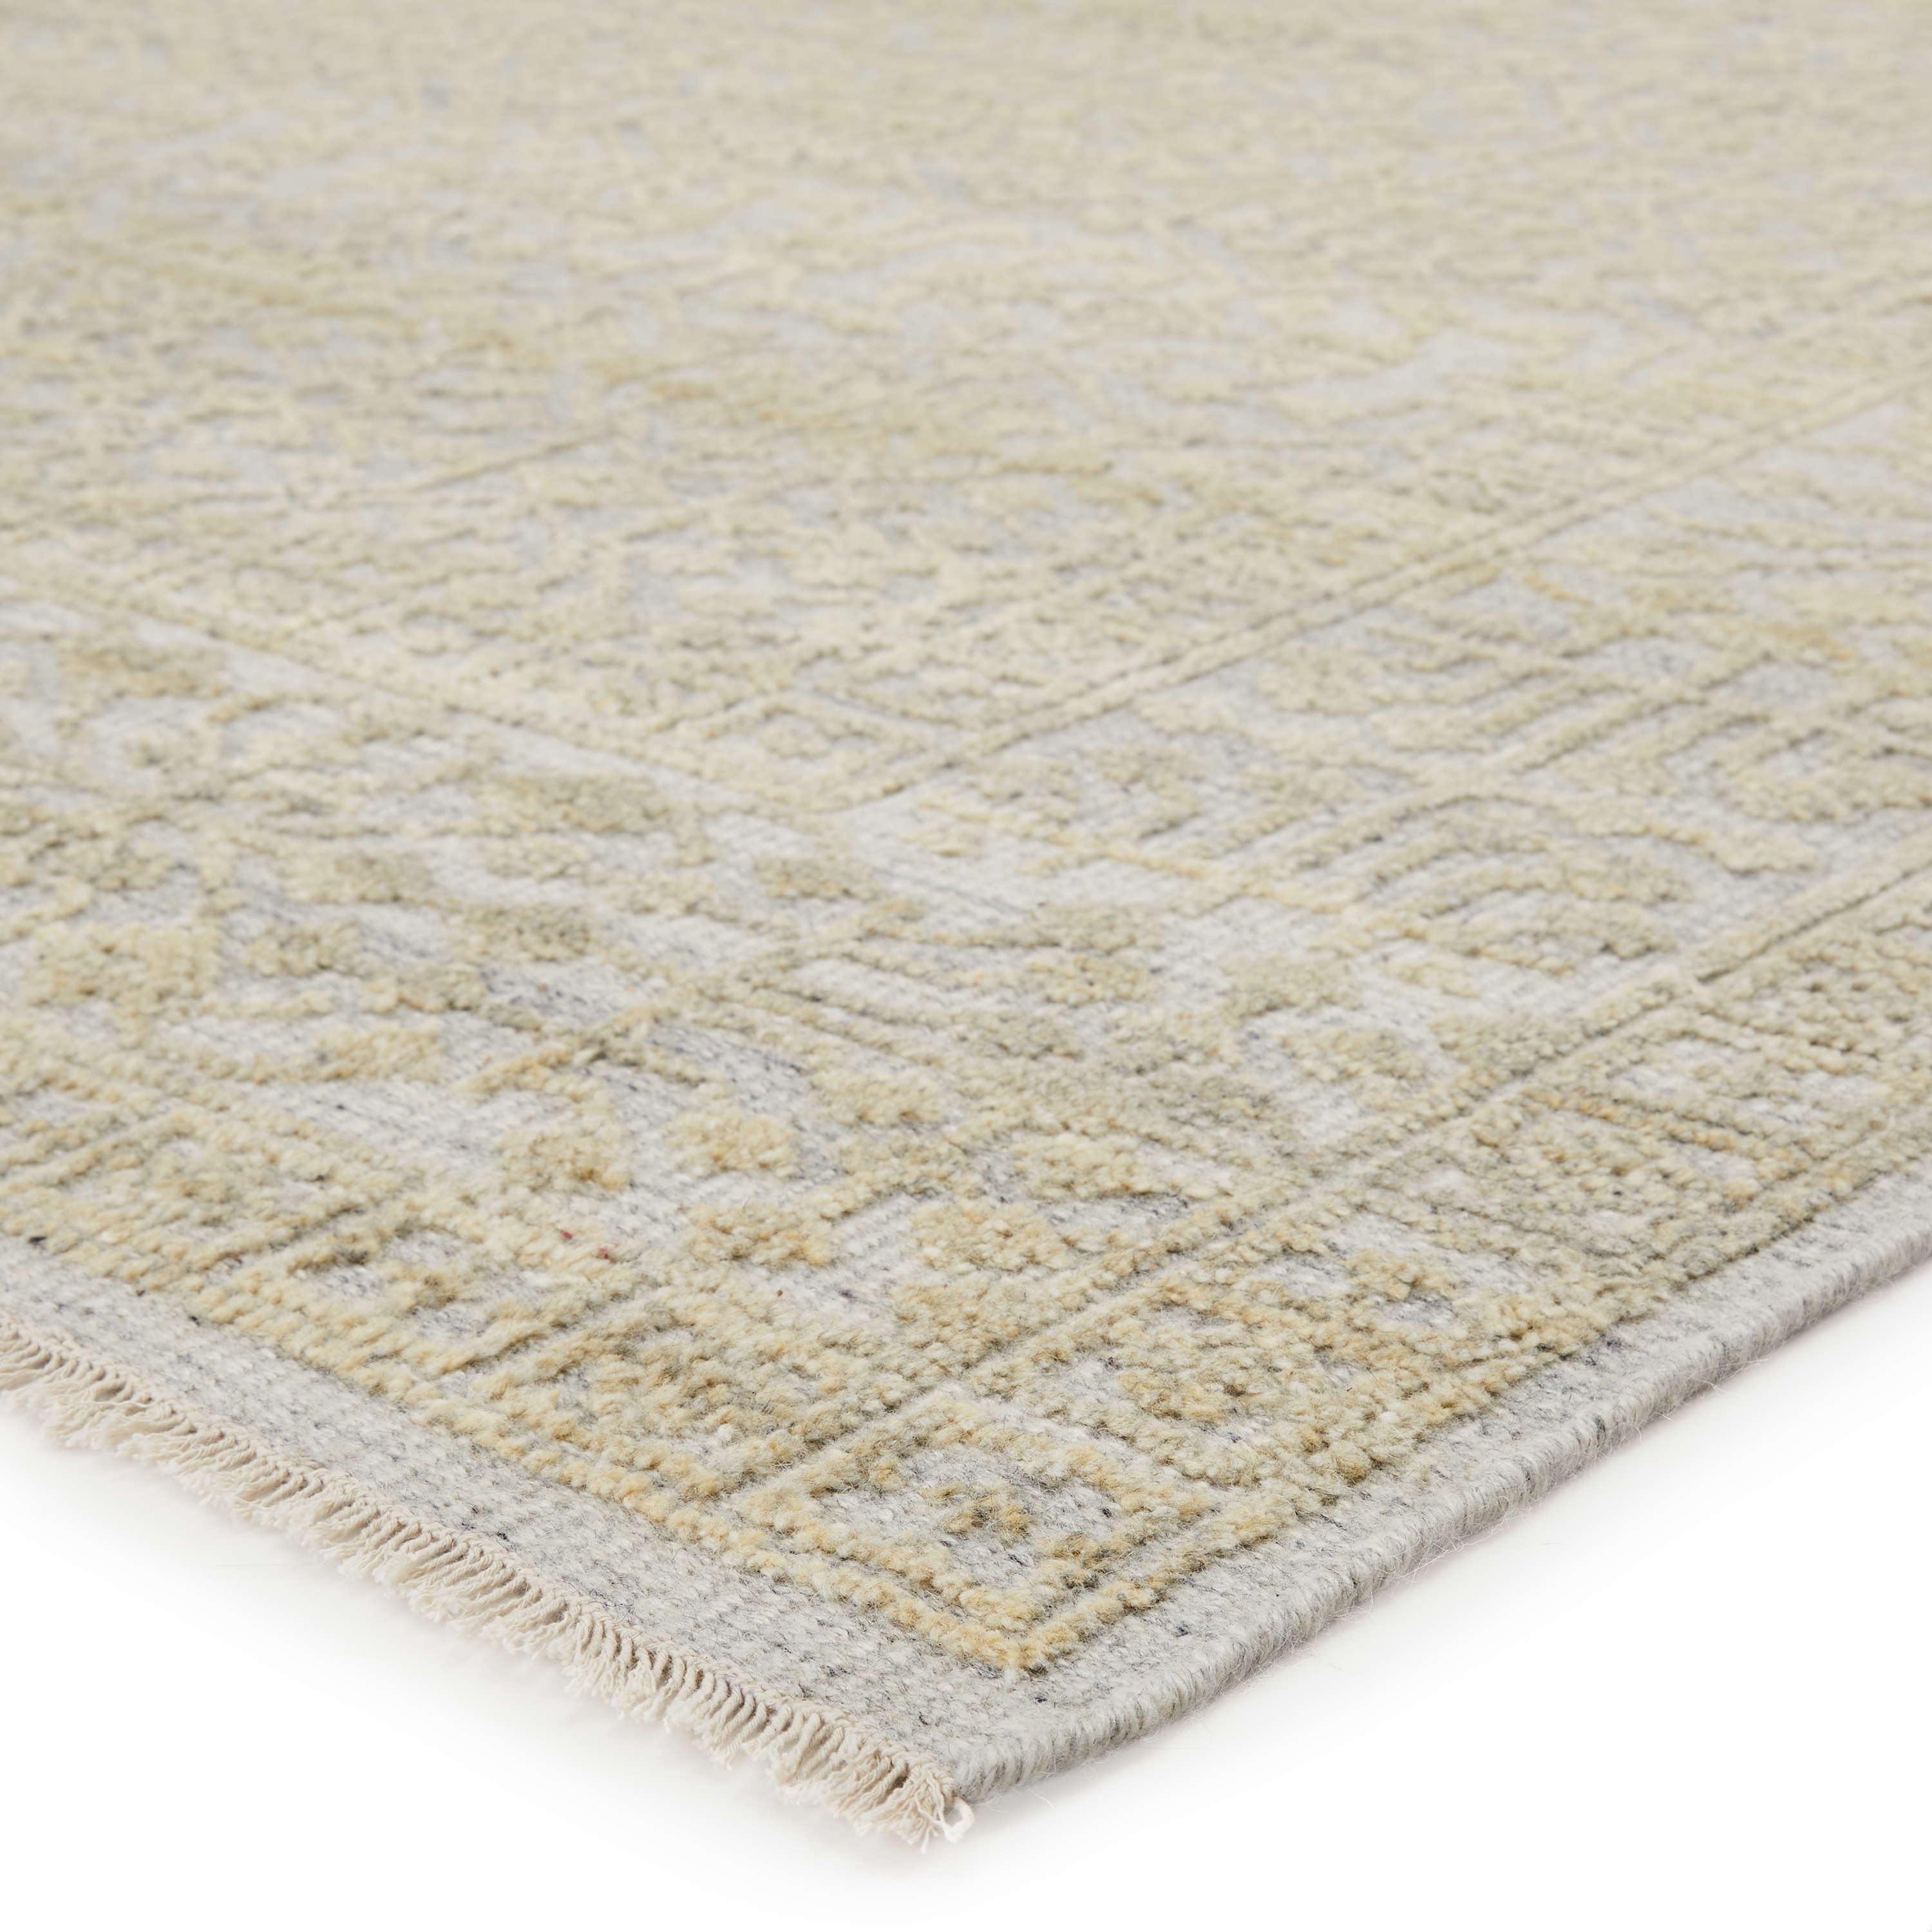 Arinna Hand-Knotted Tribal Beige/ Gray Area Rug (5'X8') - Image 1